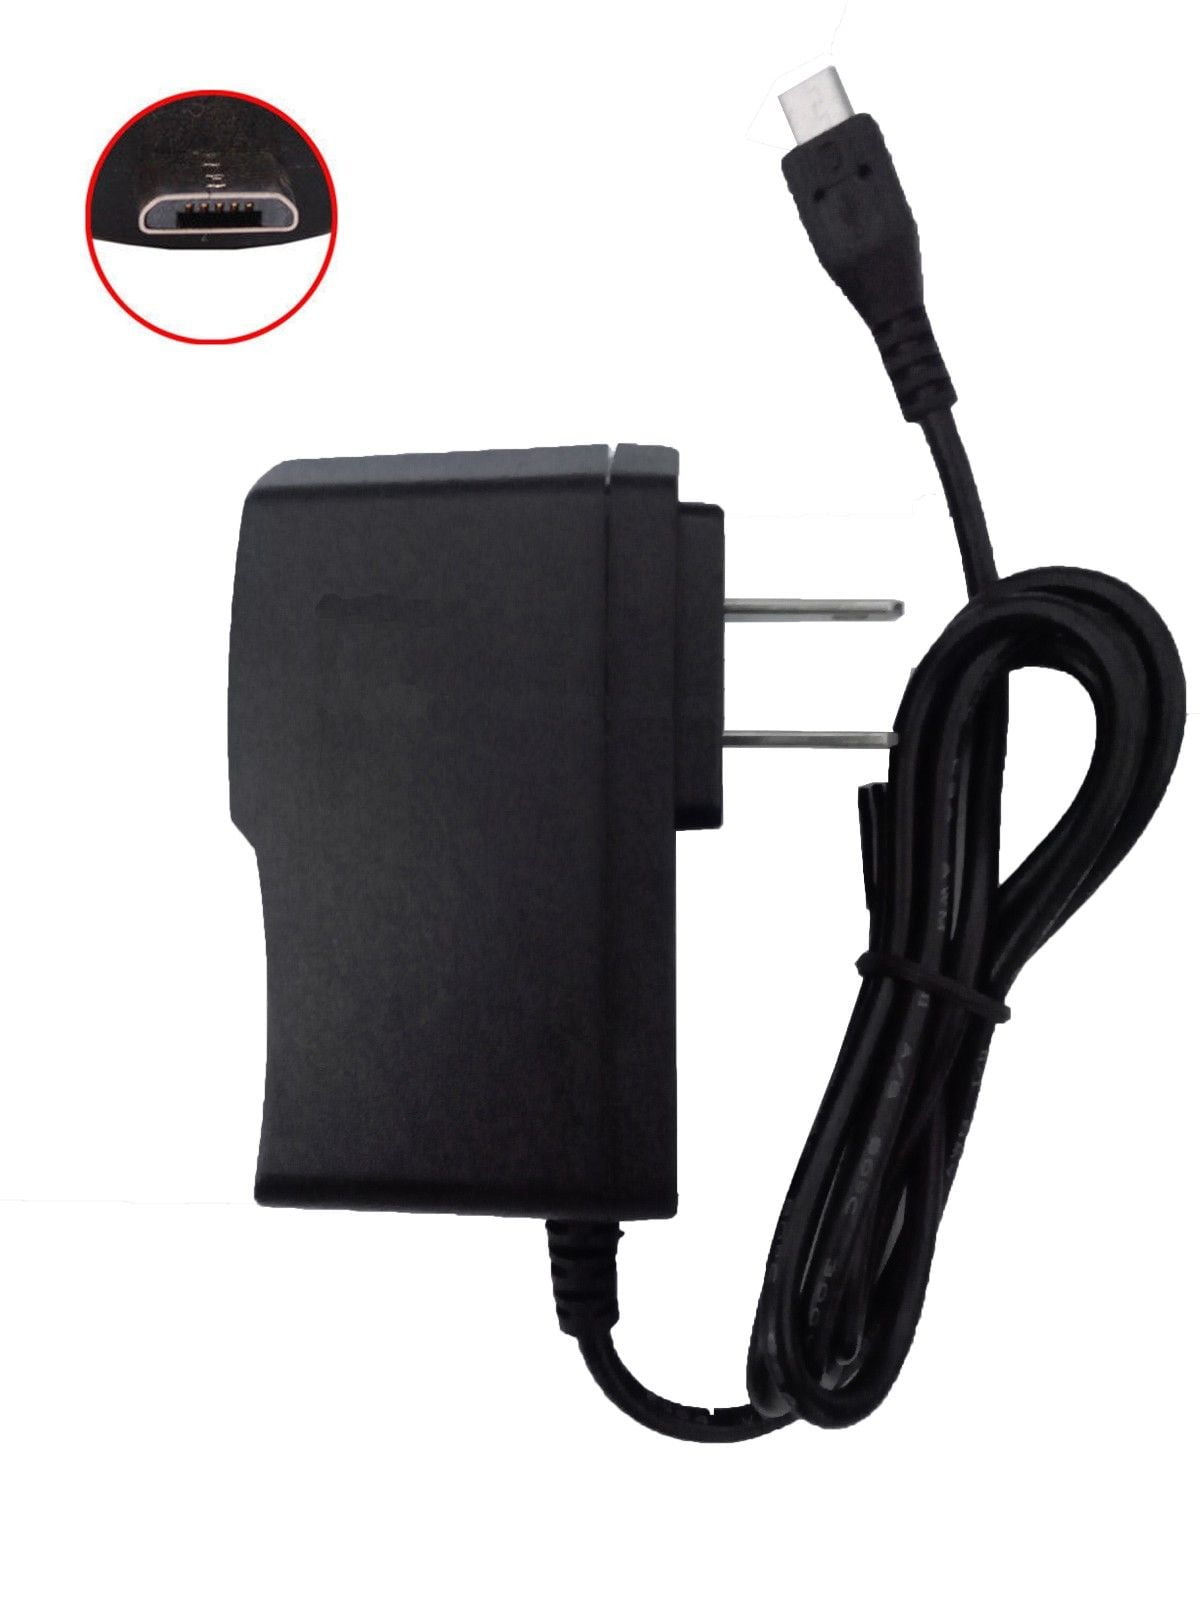 USB AC Wall Charger Adapter For ASUS Nexus 7 2nd Gen 2013 7" Tablet